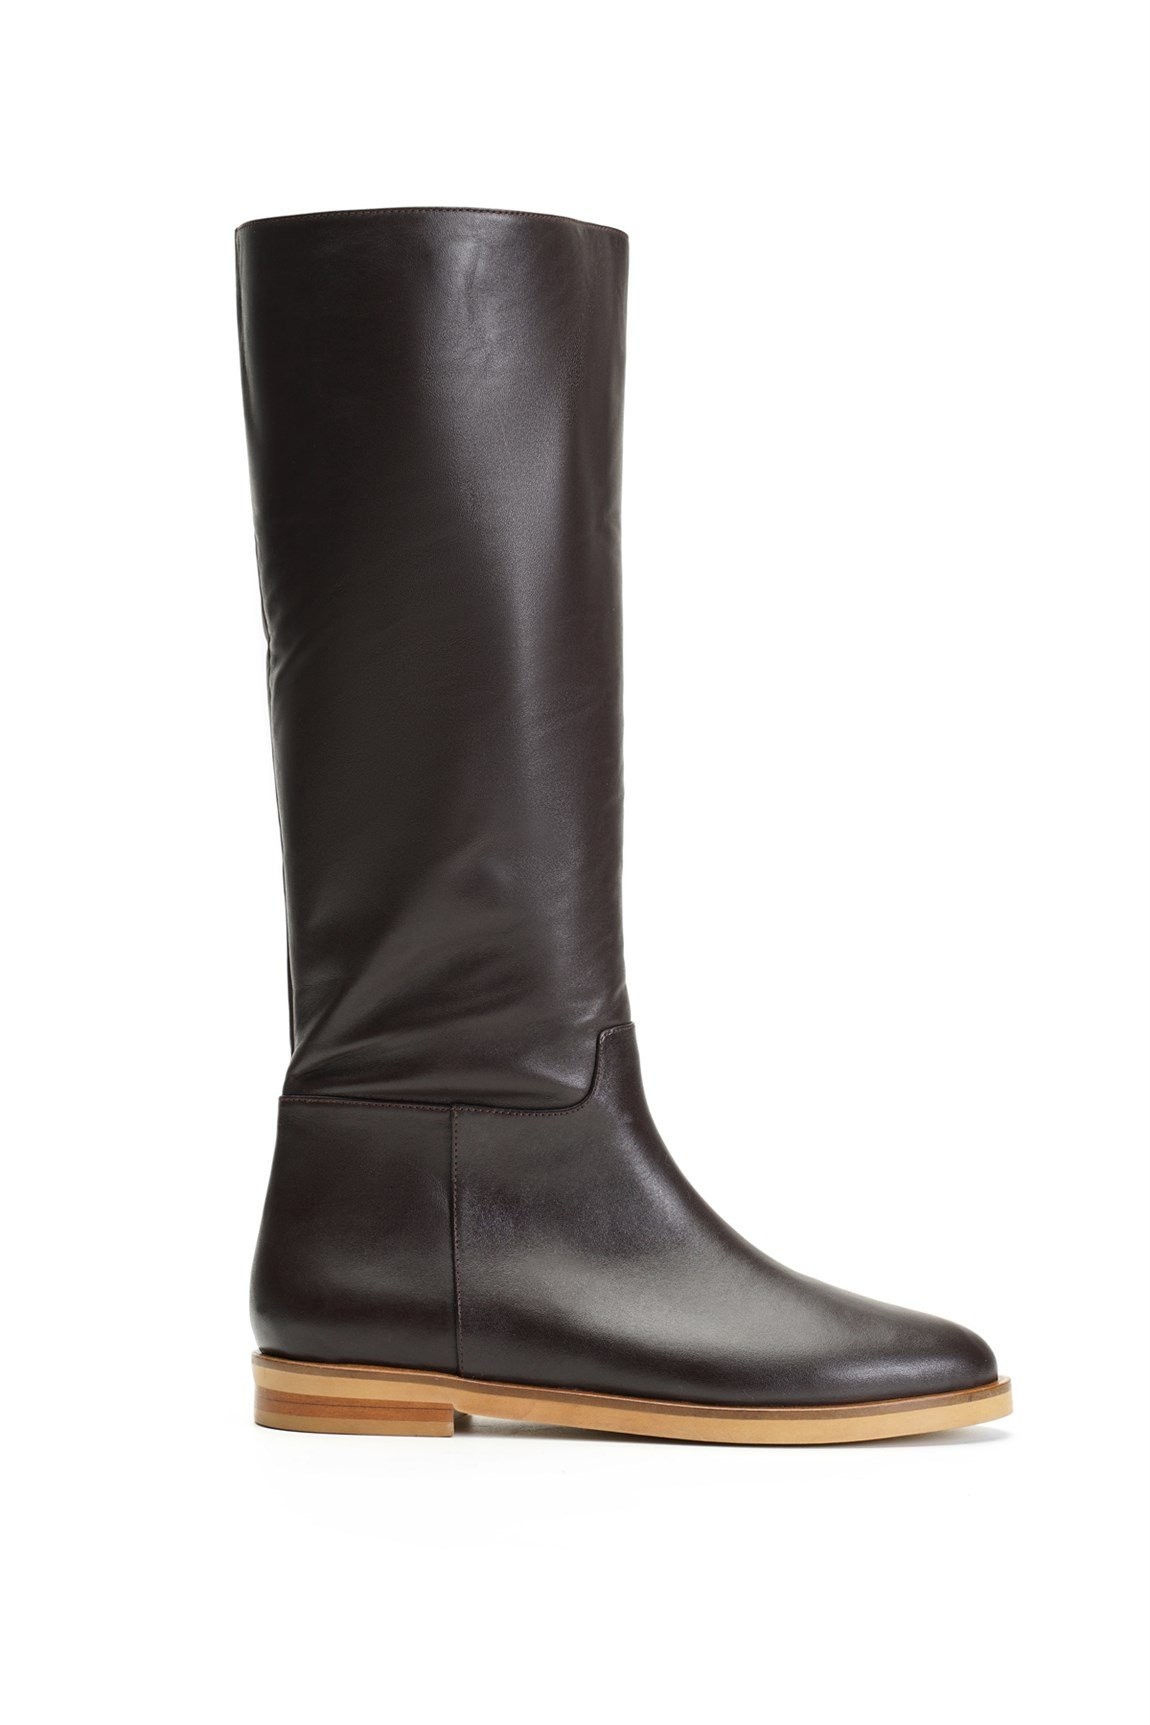 Jabotter Axel Bitter Brown Leather Boots